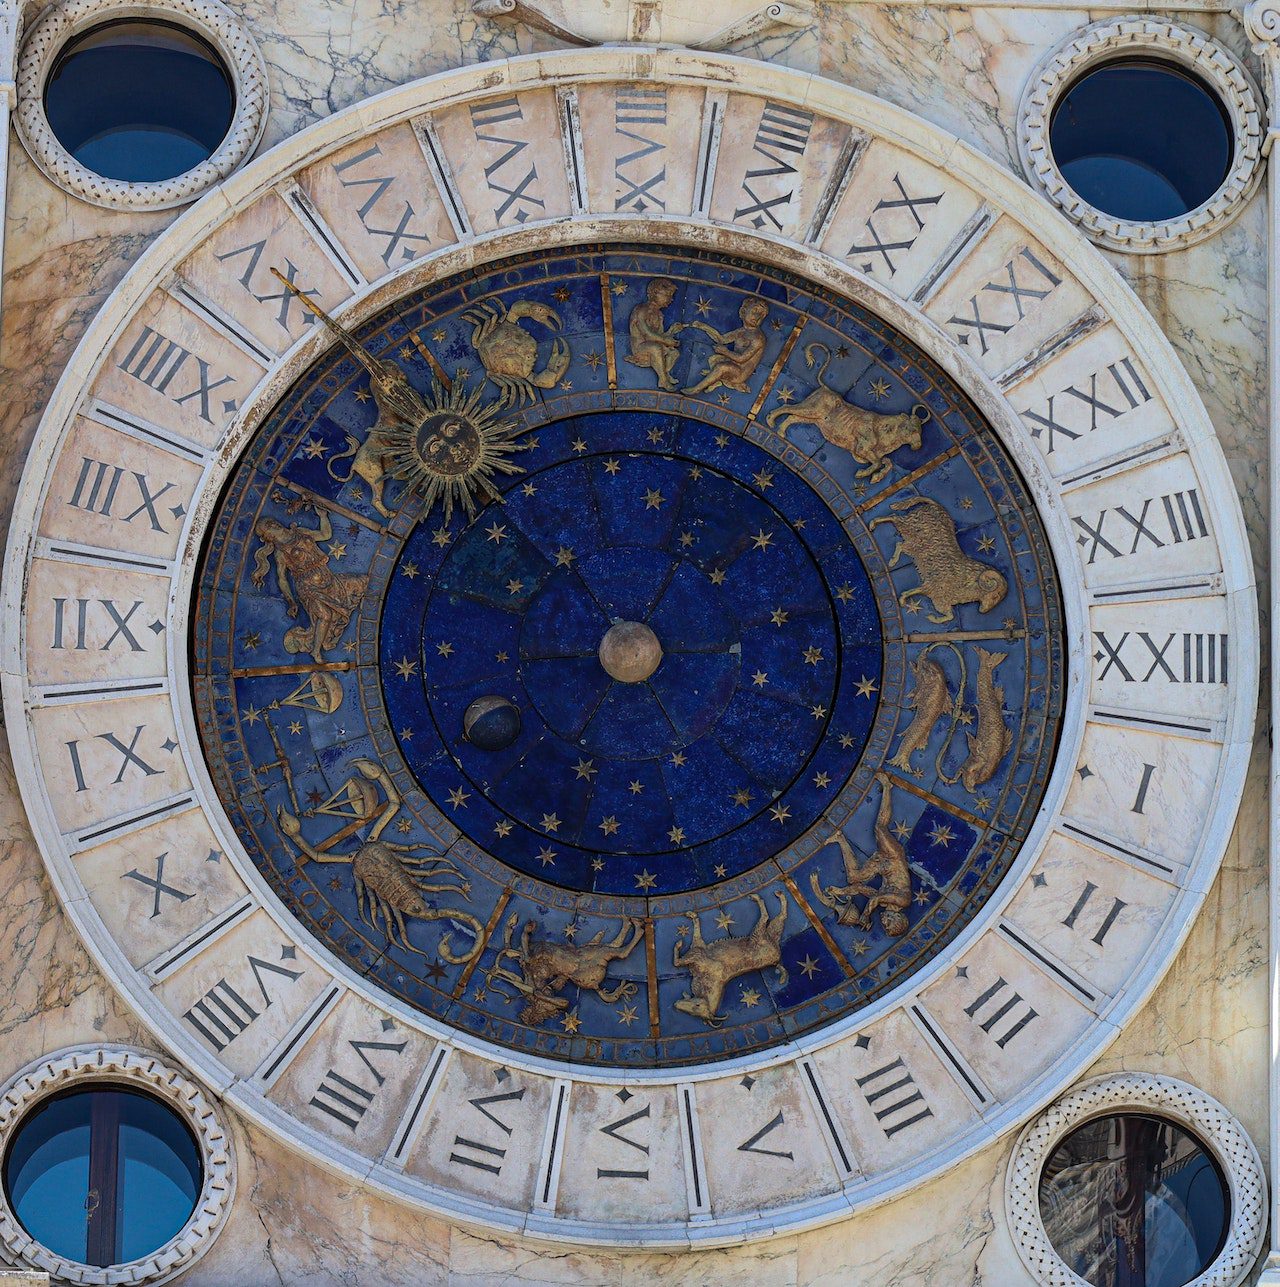 A clock with the signs of the zodiac